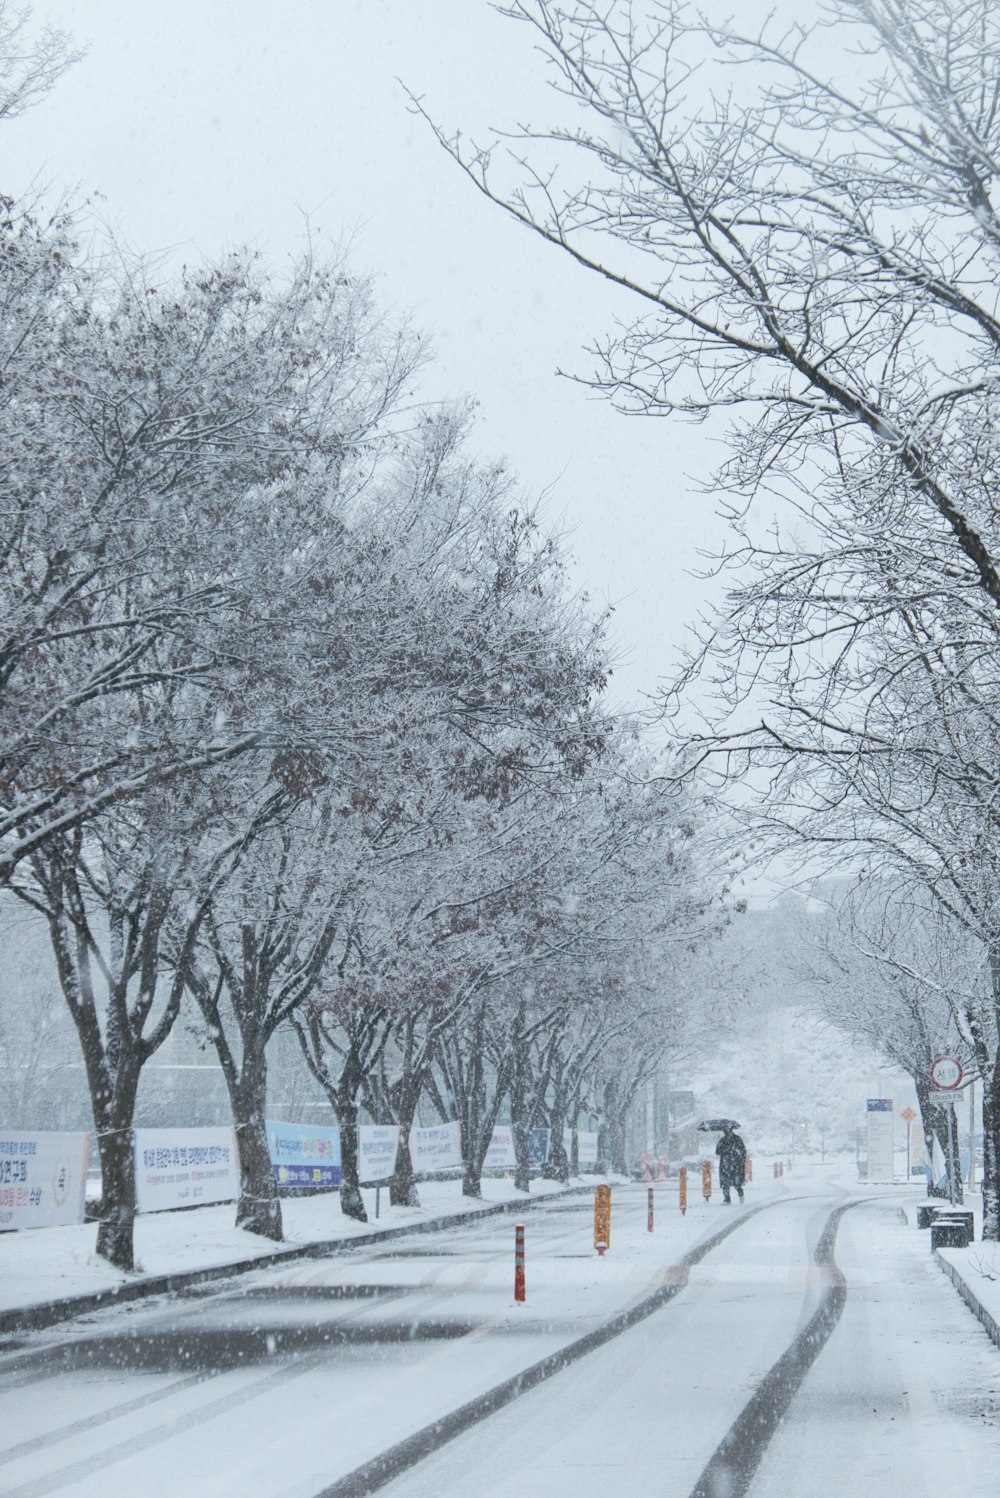 a snow covered street with trees and signs